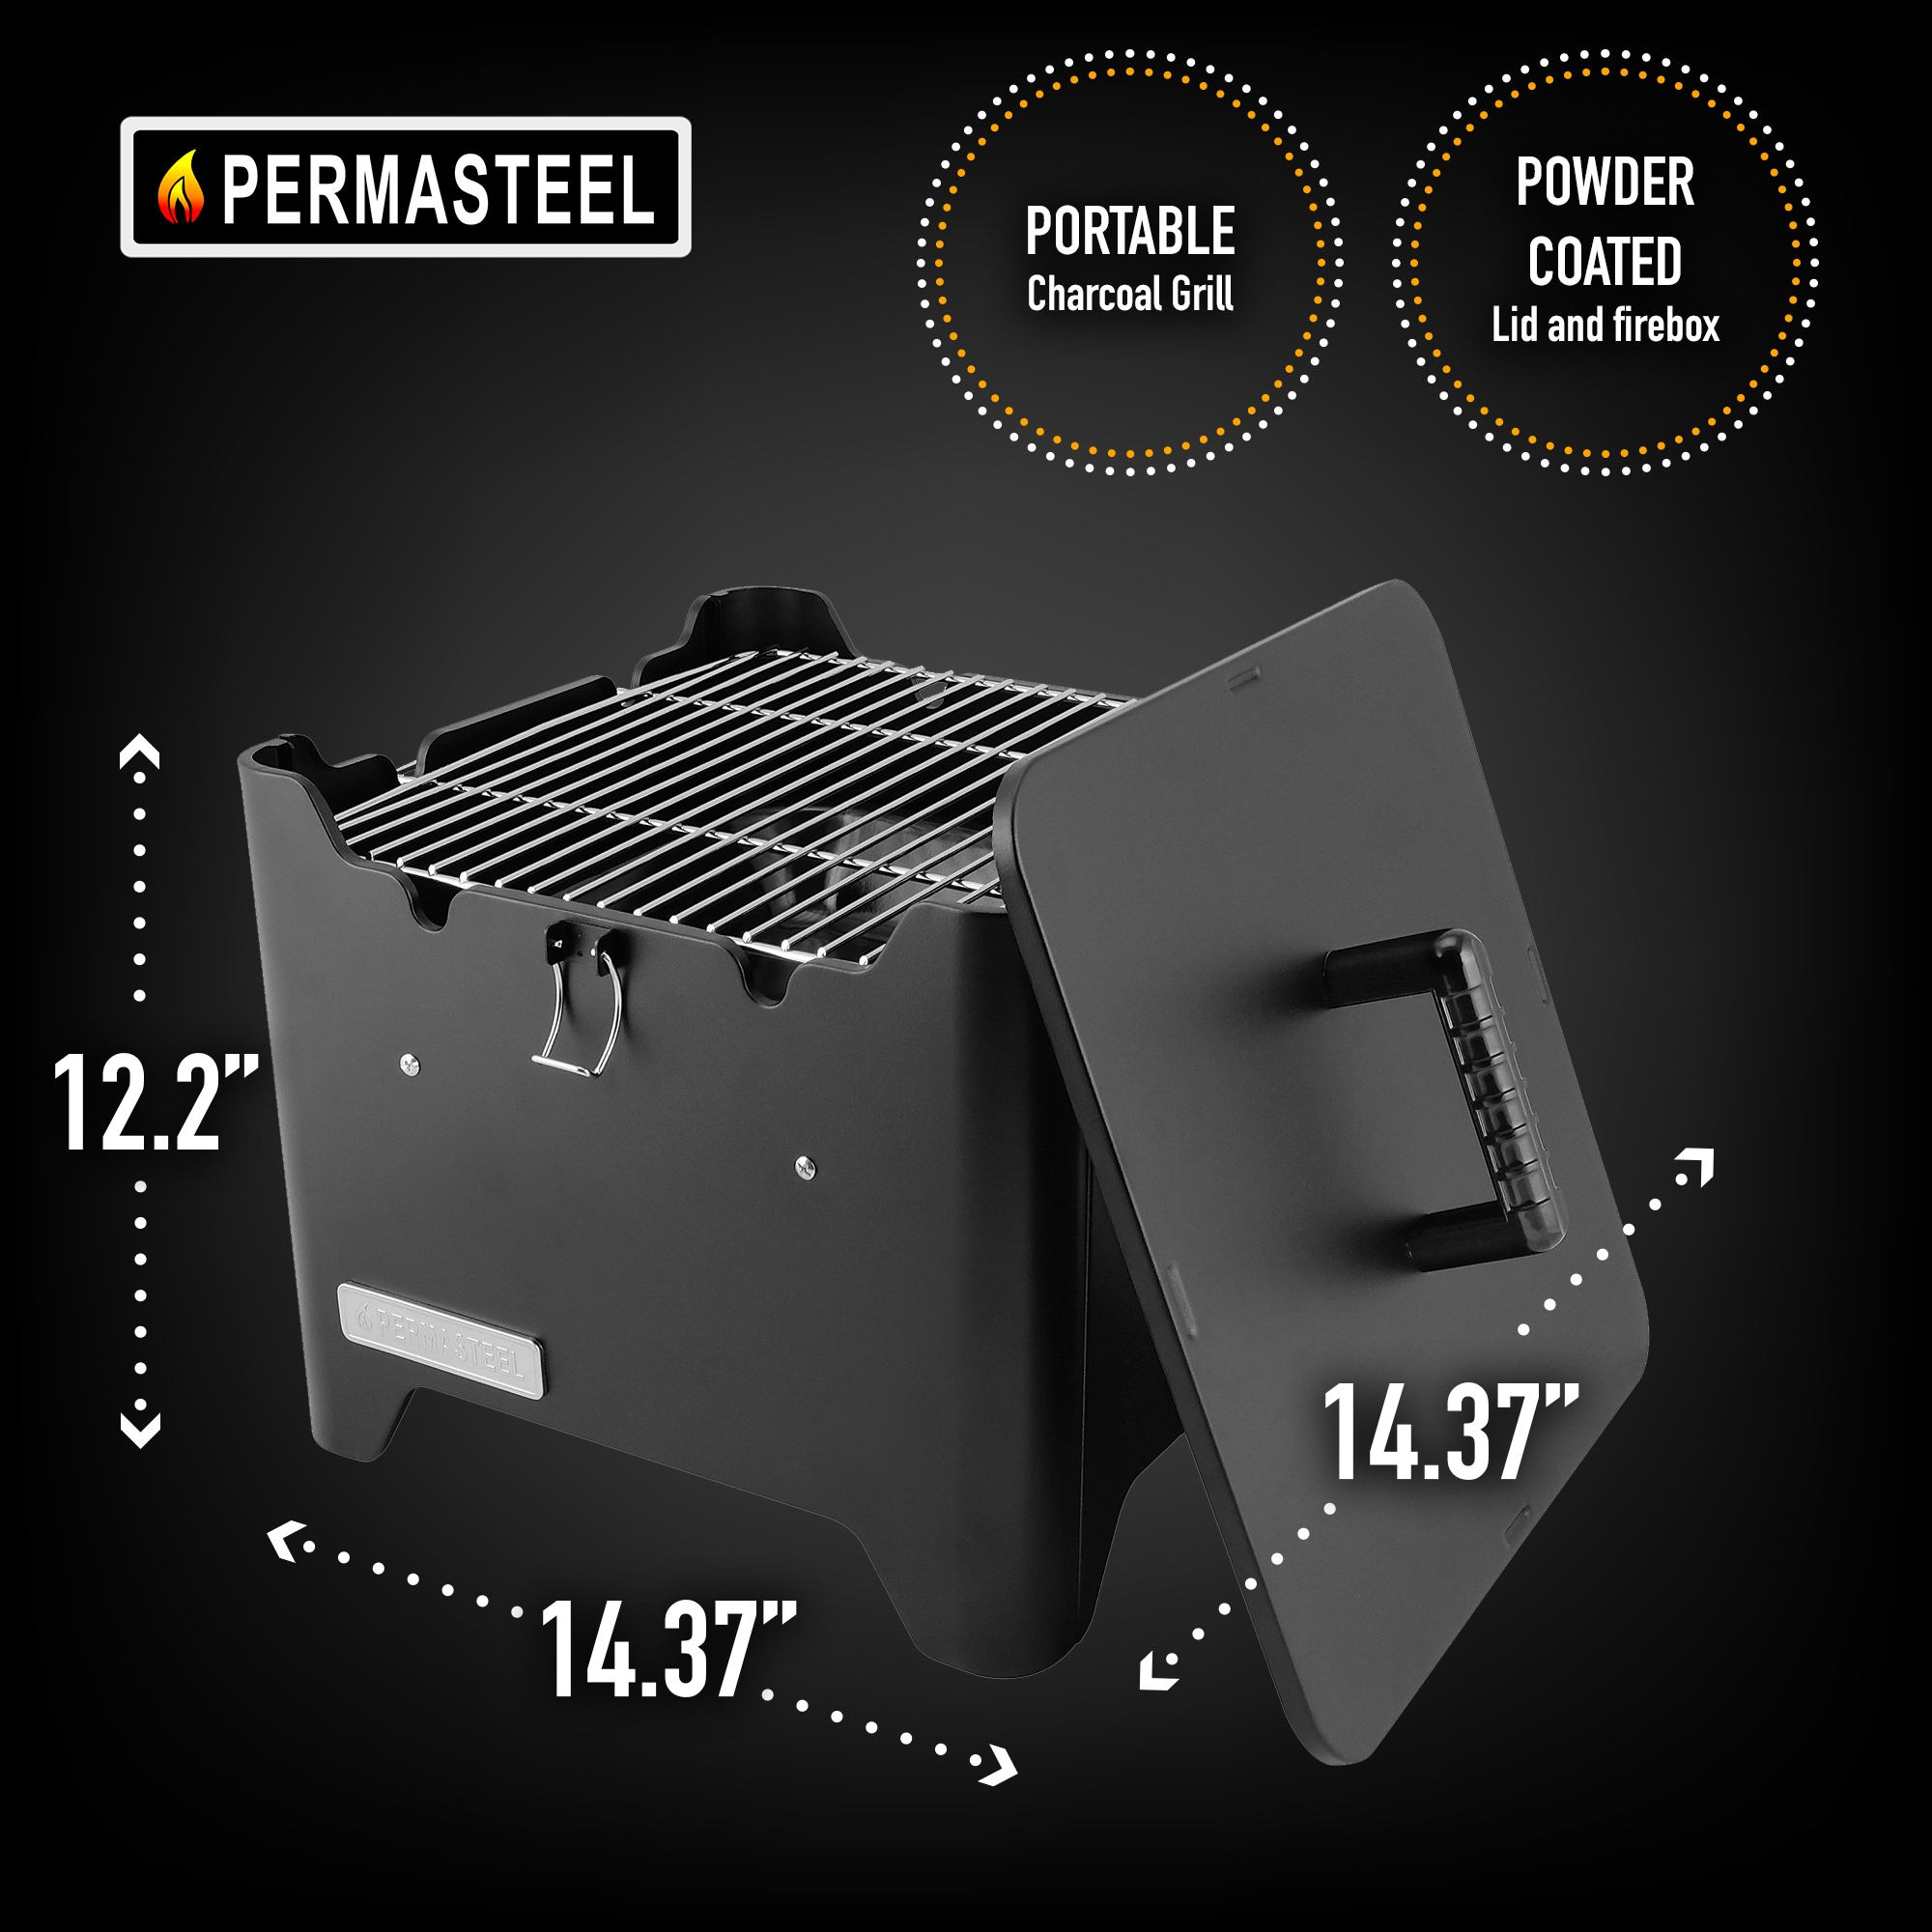 Permasteel Portable Charcoal Grill with Removable Lid - 153 Sq Inches ...